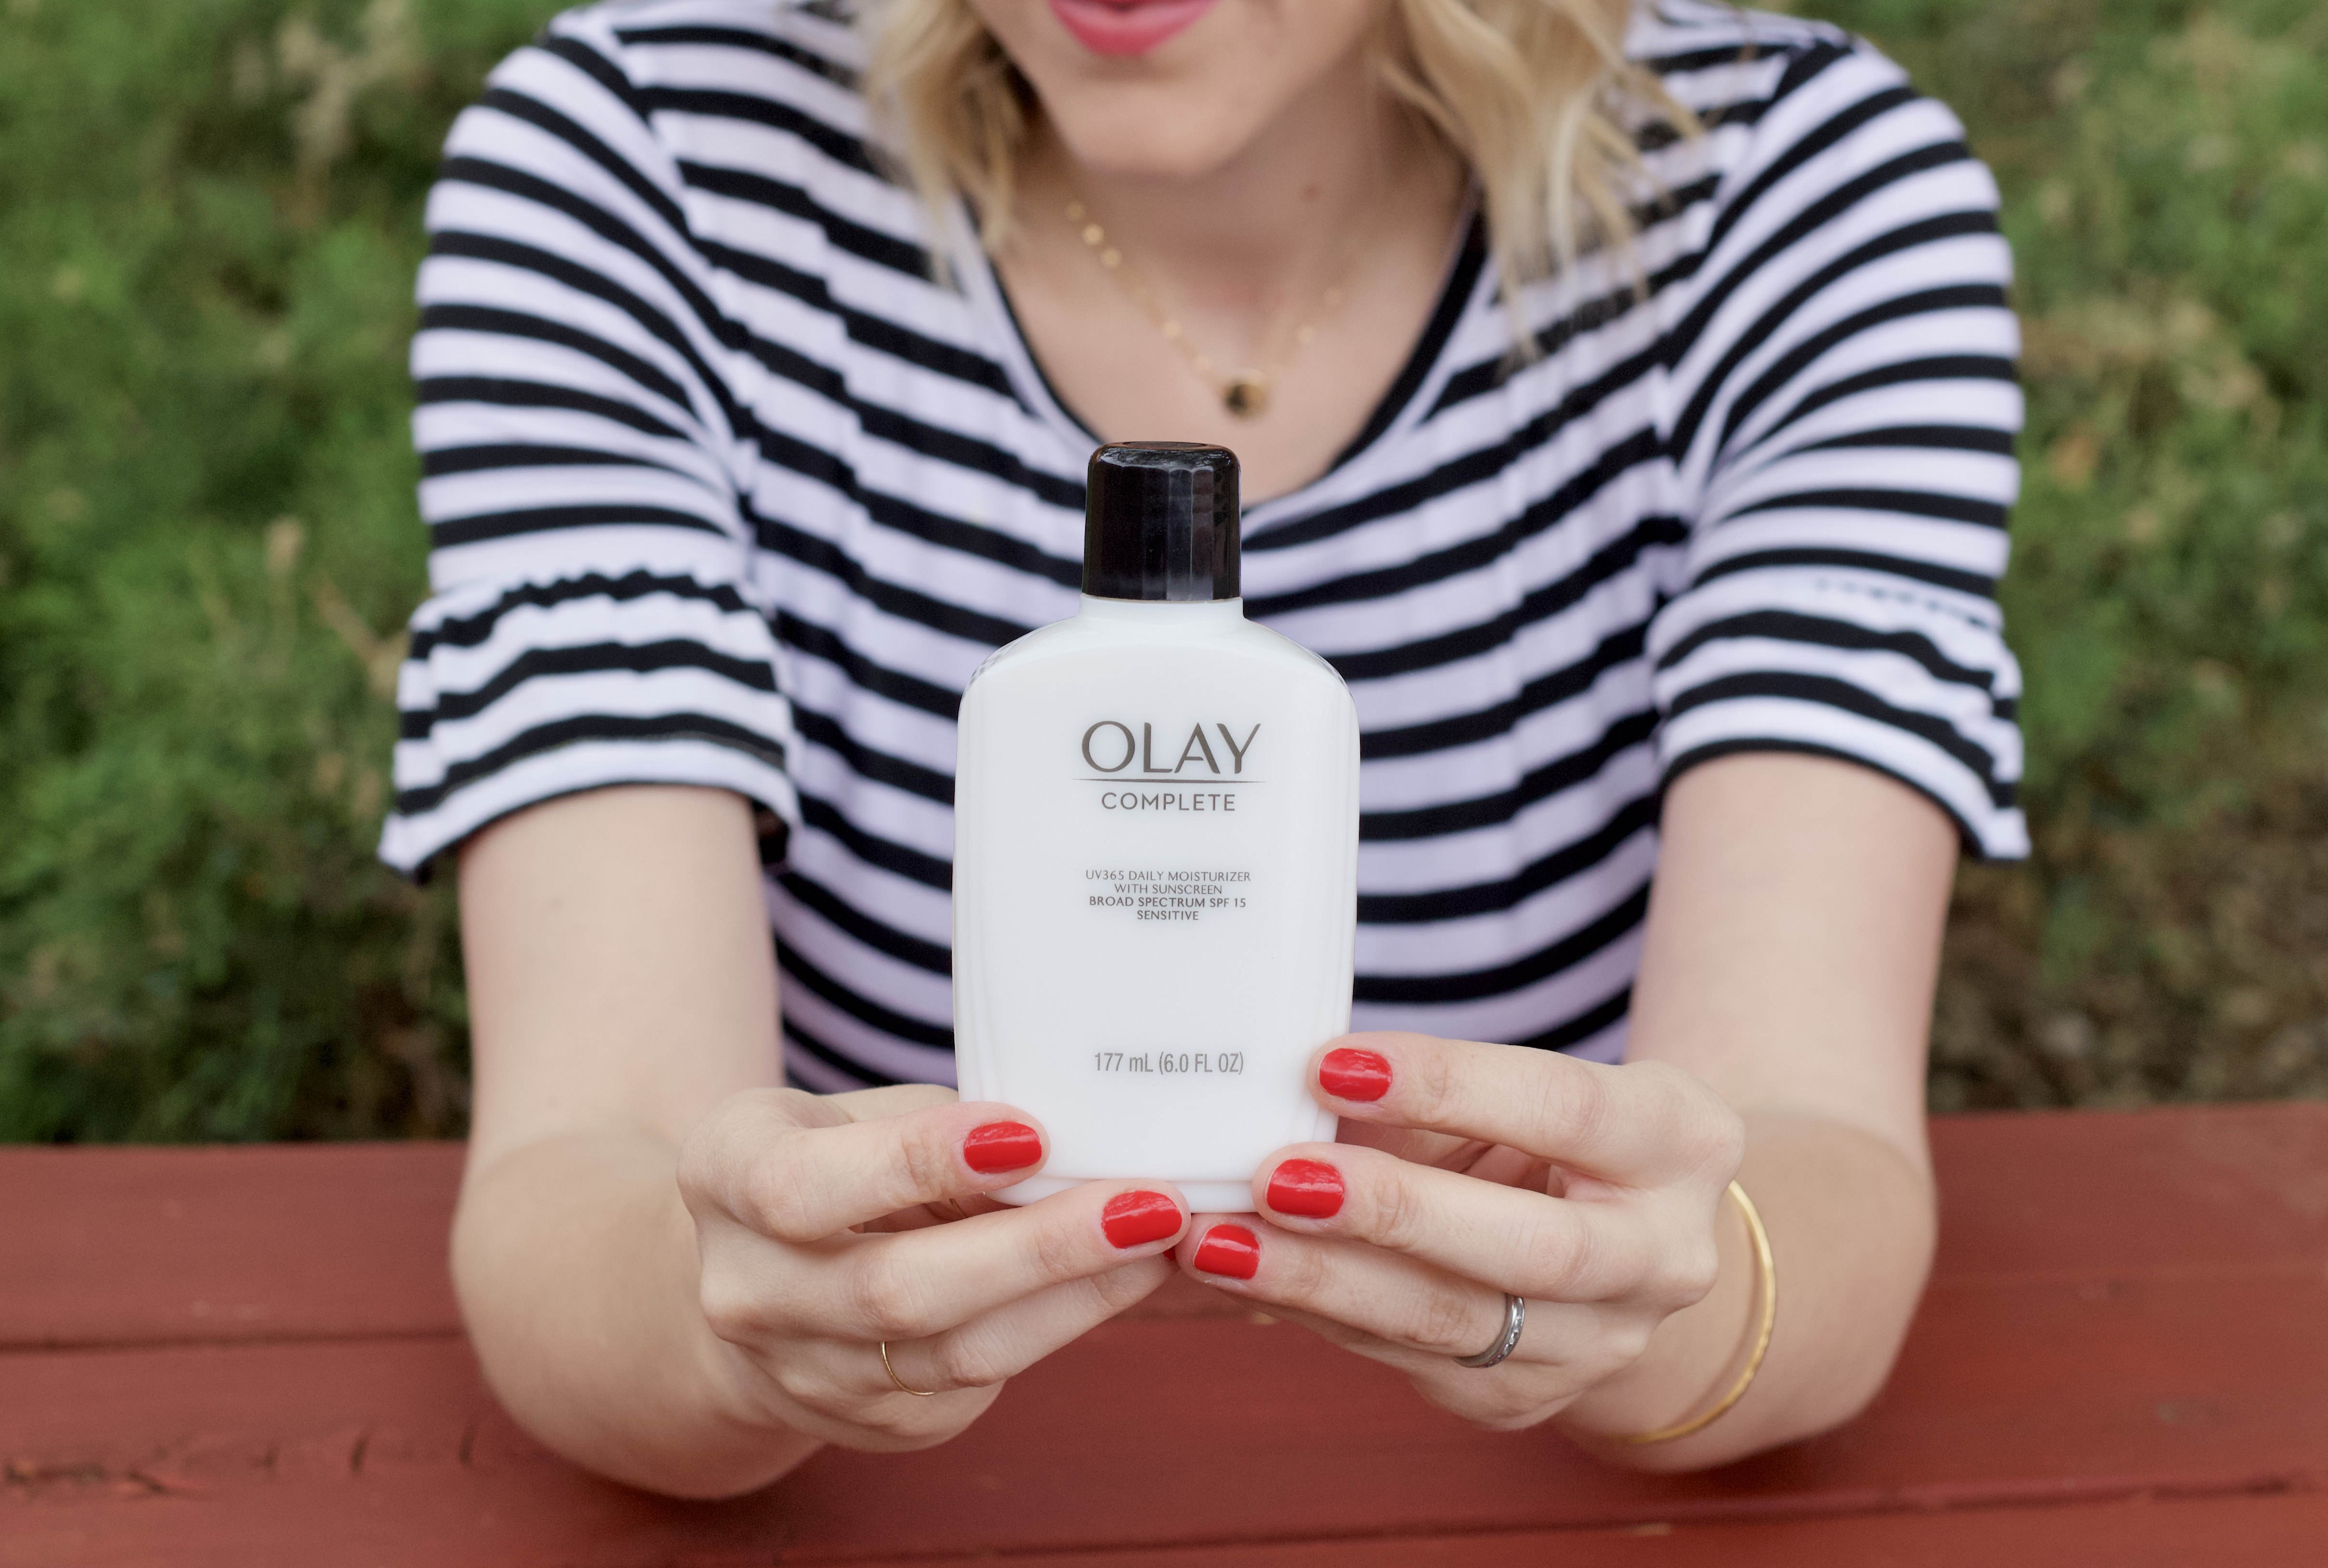 olay all day daily moisturizer review #olay #sunprotection #skincare #affordableskincare